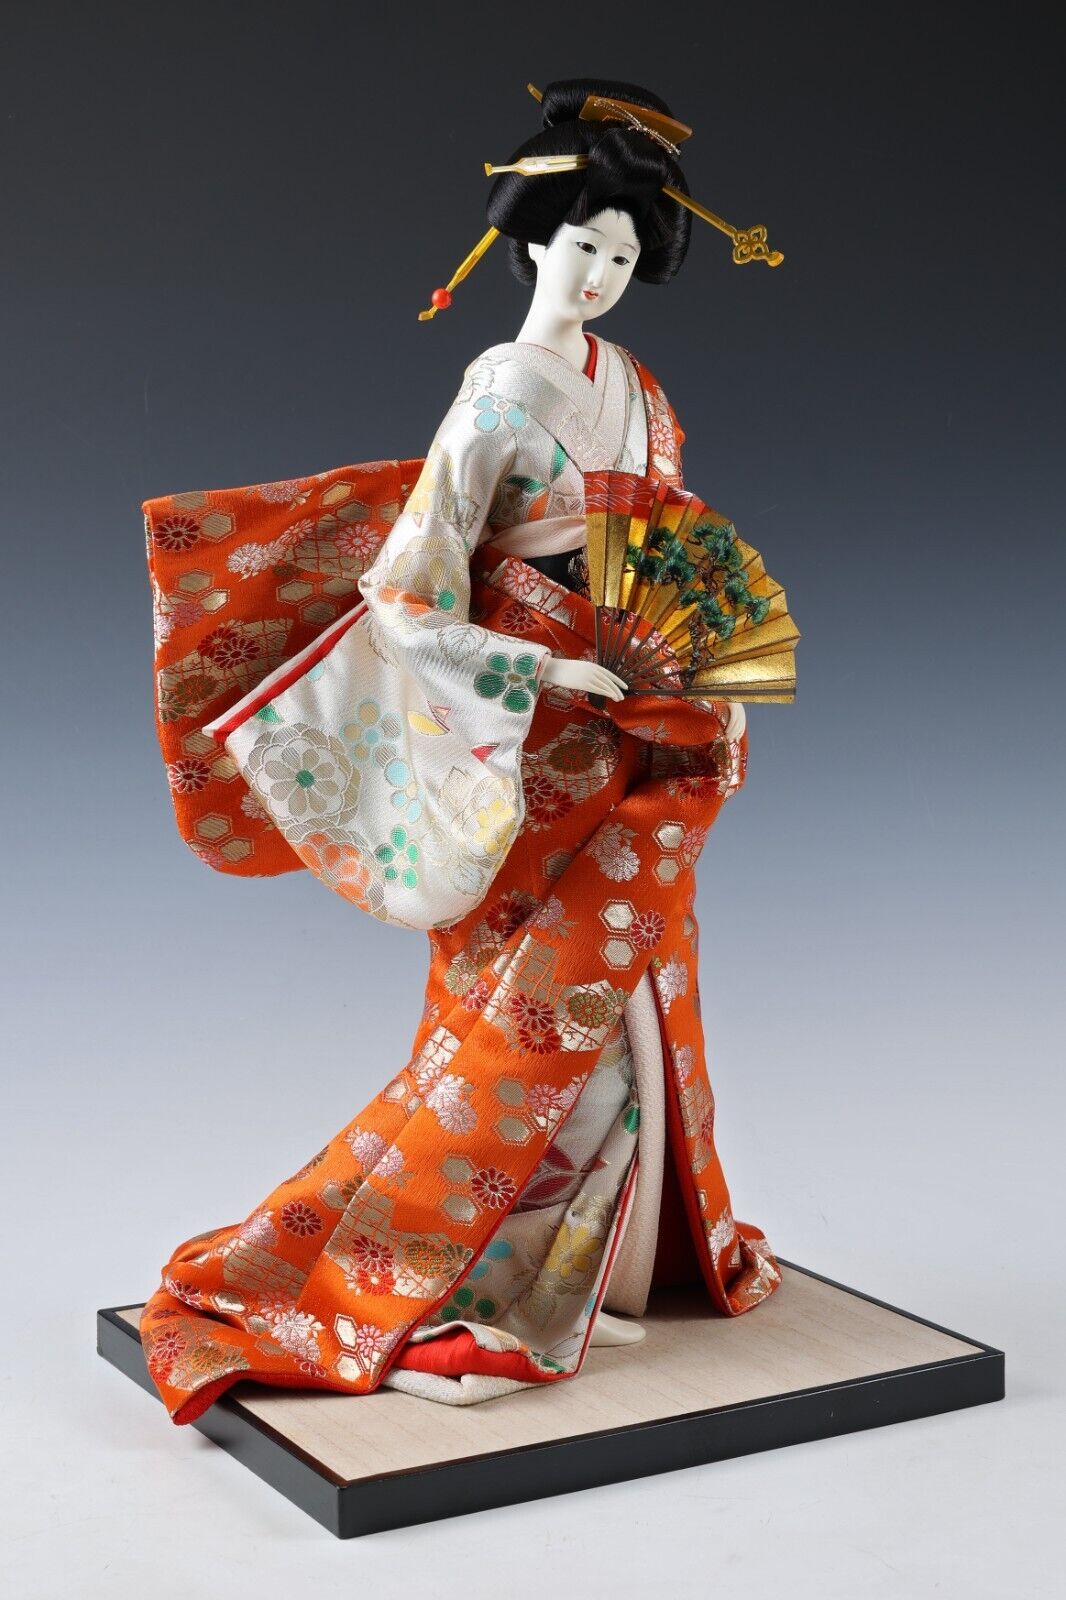 Collectible Japanese Geisha Traditional Doll in Kimono with Fan Asian Art.